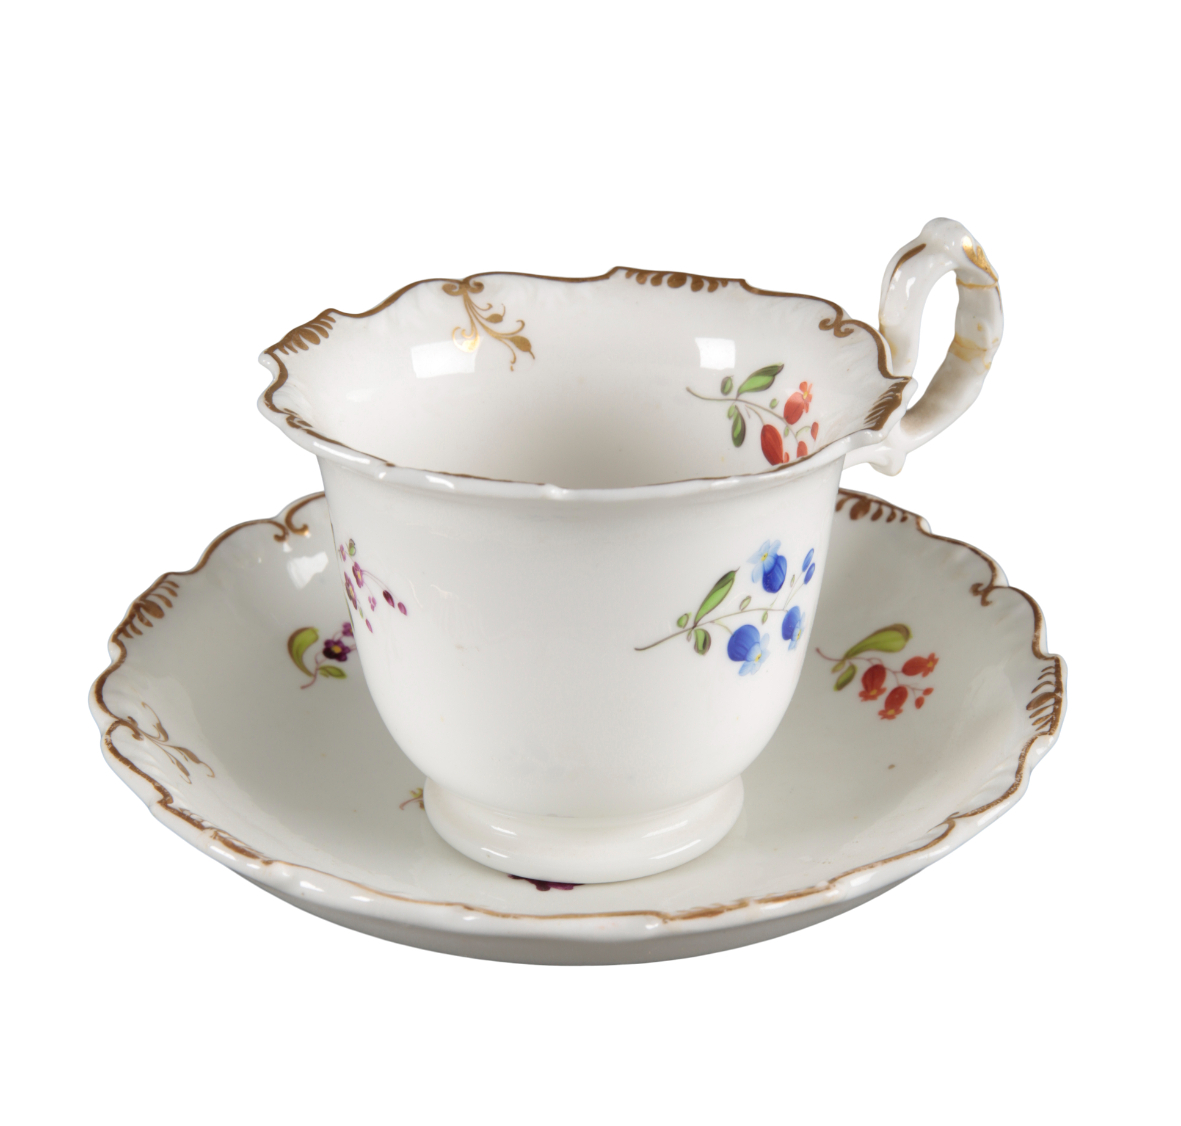 A GROUP OF FOUR H & R DANIEL SHREWSBURY SHAPE COFFEE CUPS AND SAUCERS - Image 2 of 6